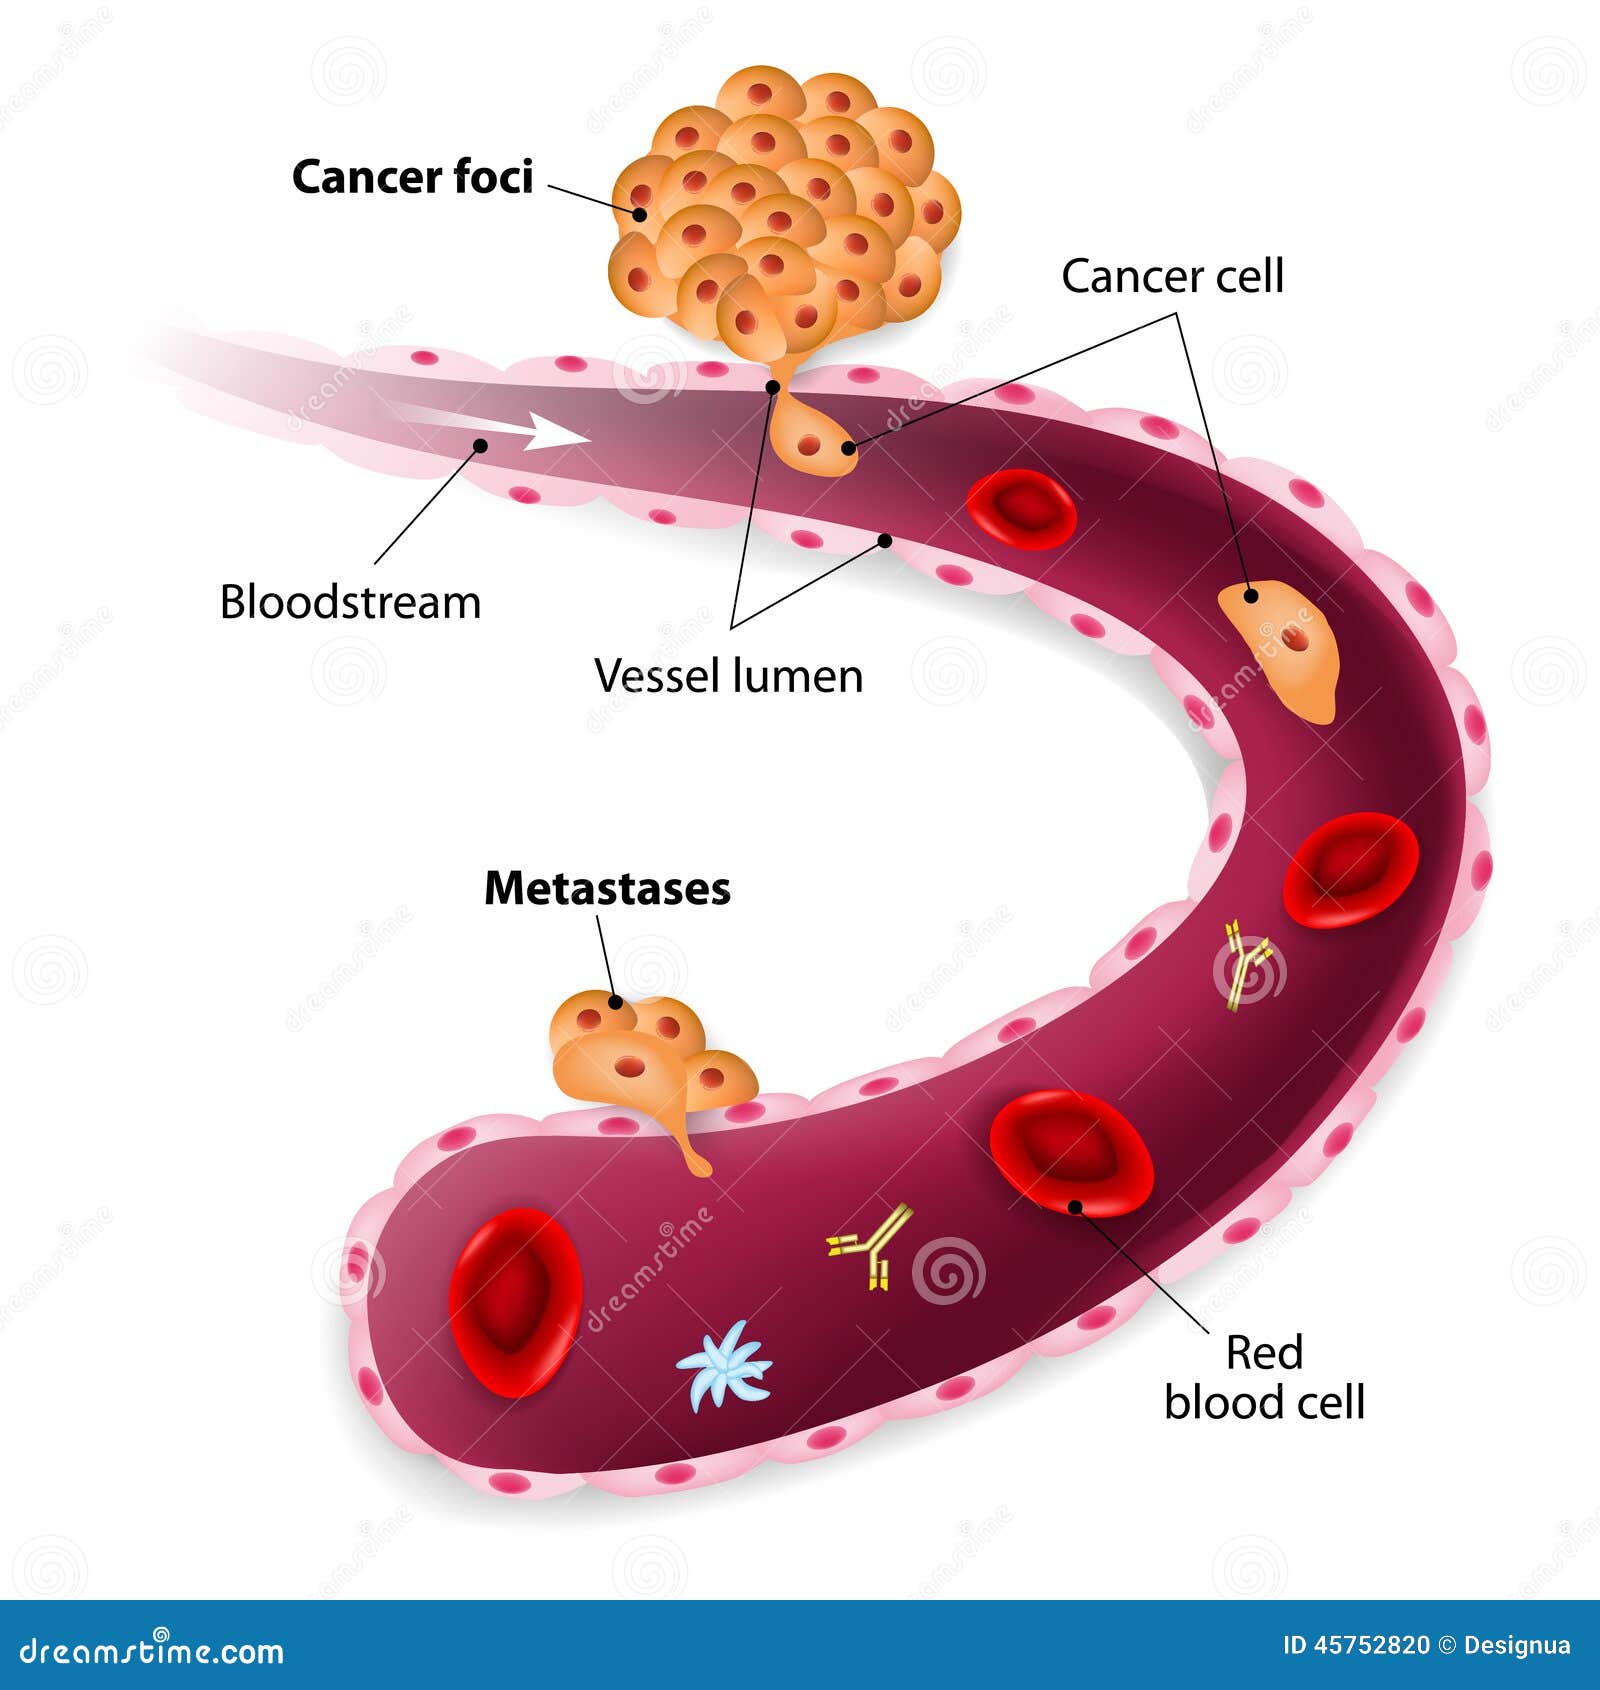 cancer cells, cancer foci and metastases